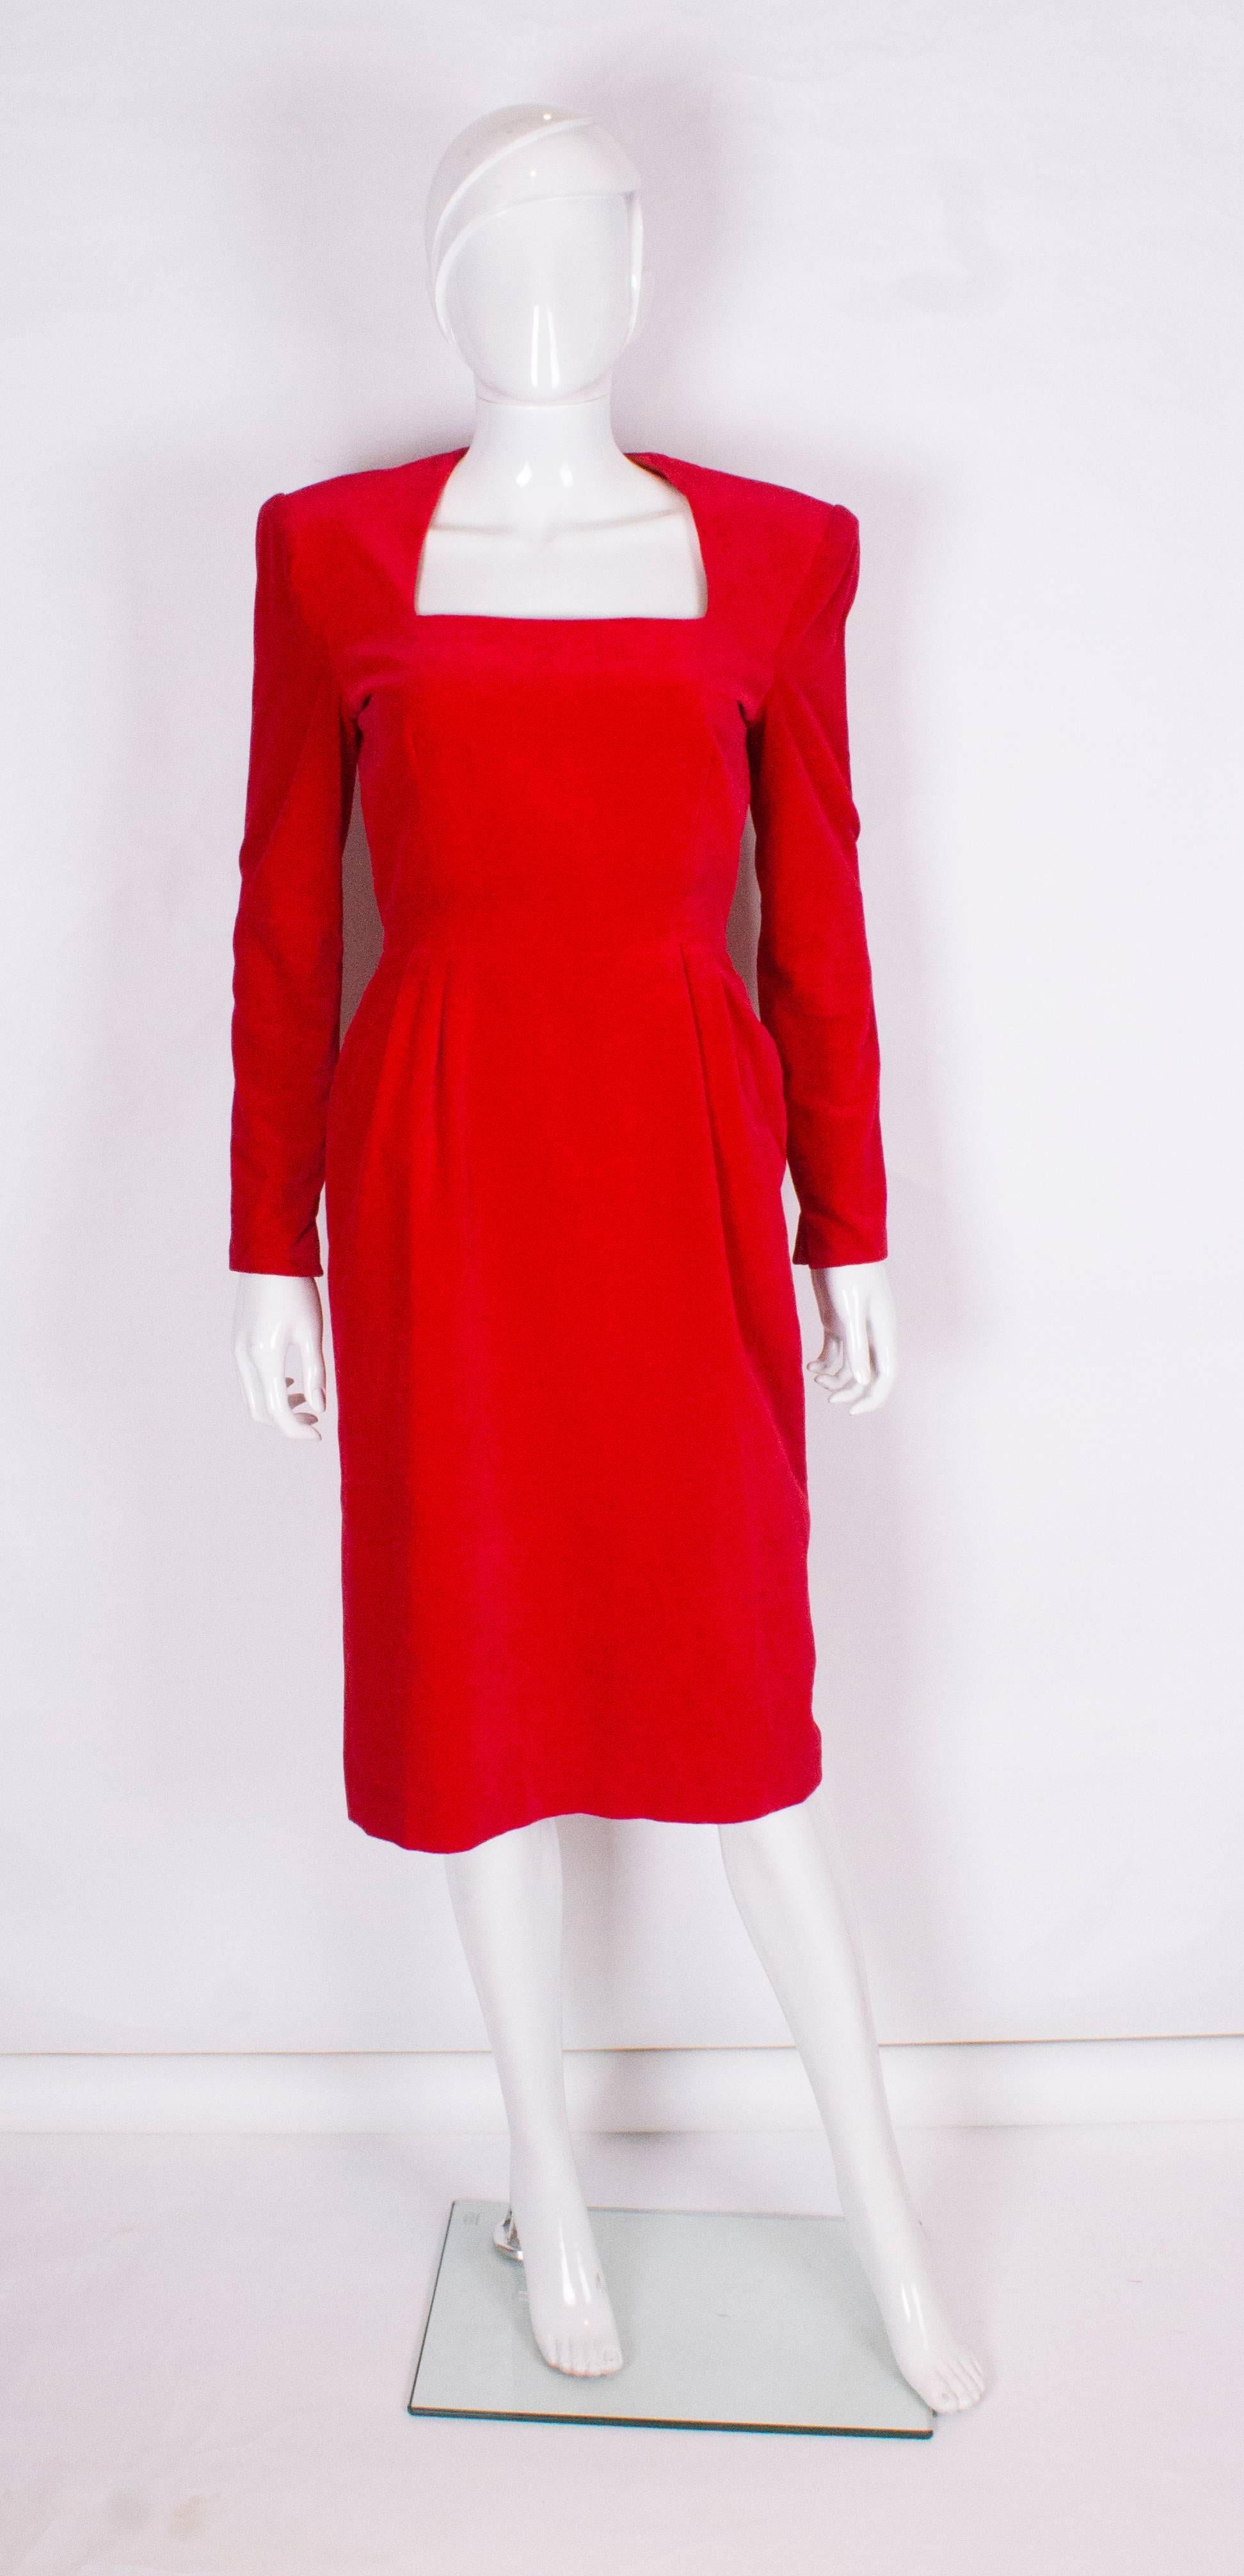 A great vintage  dress for Fall and the festive season by British designer Bruce Oldfield.
In red velvet, the dress has a square neckline, 2'' slits at the sleeves, a back zip and is fully lined.